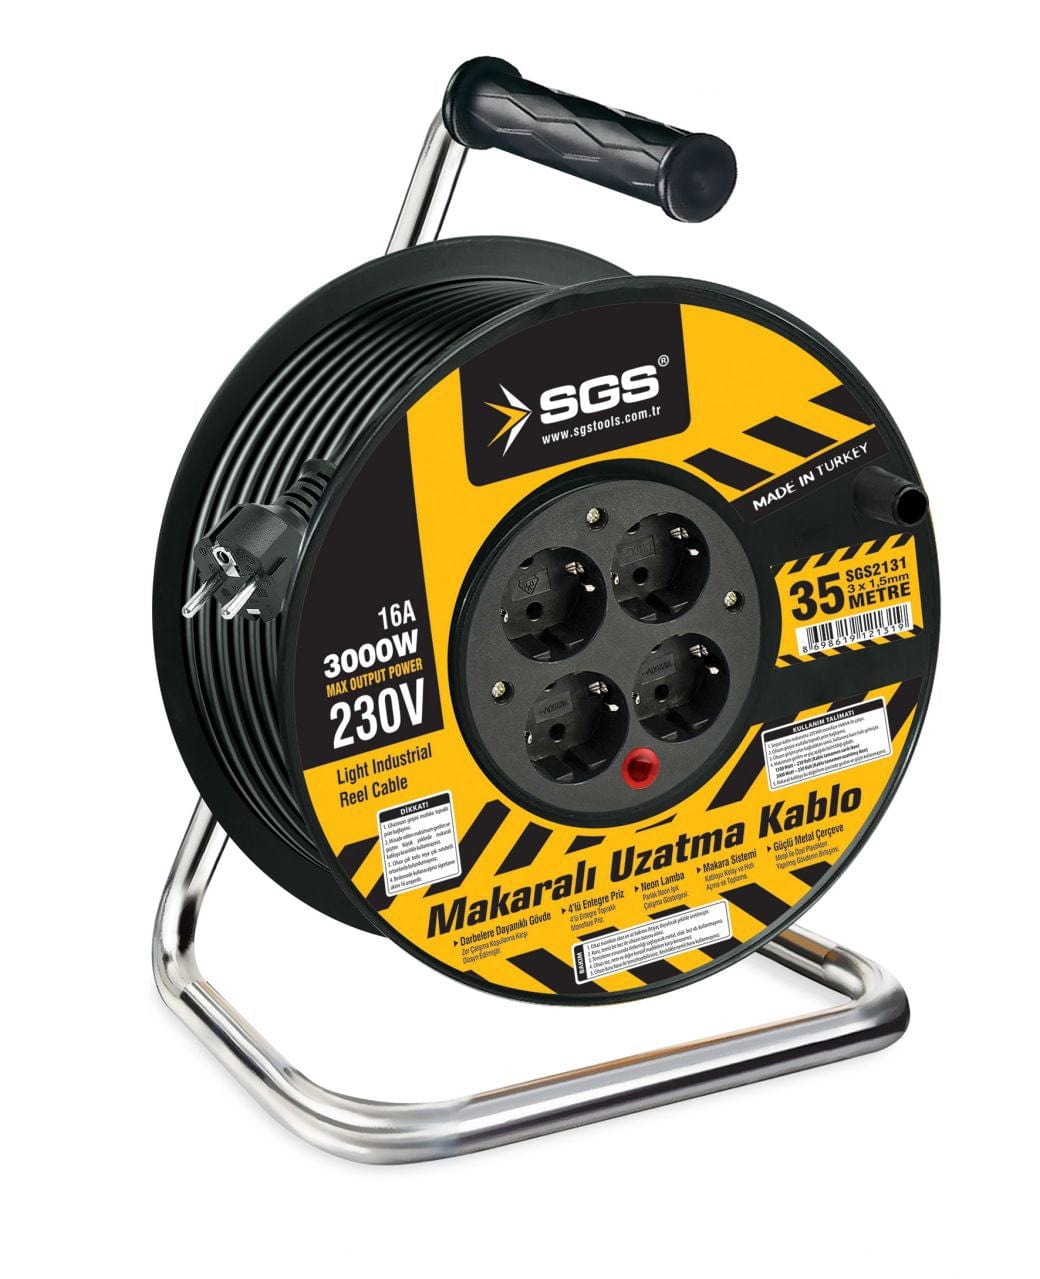 SGS 50m Roller Extension Cable Reel 3 x 1.5mm 2-Pins - SGS2132 | Supply Master | Accra, Ghana Extension Cords & Accessories Buy Tools hardware Building materials